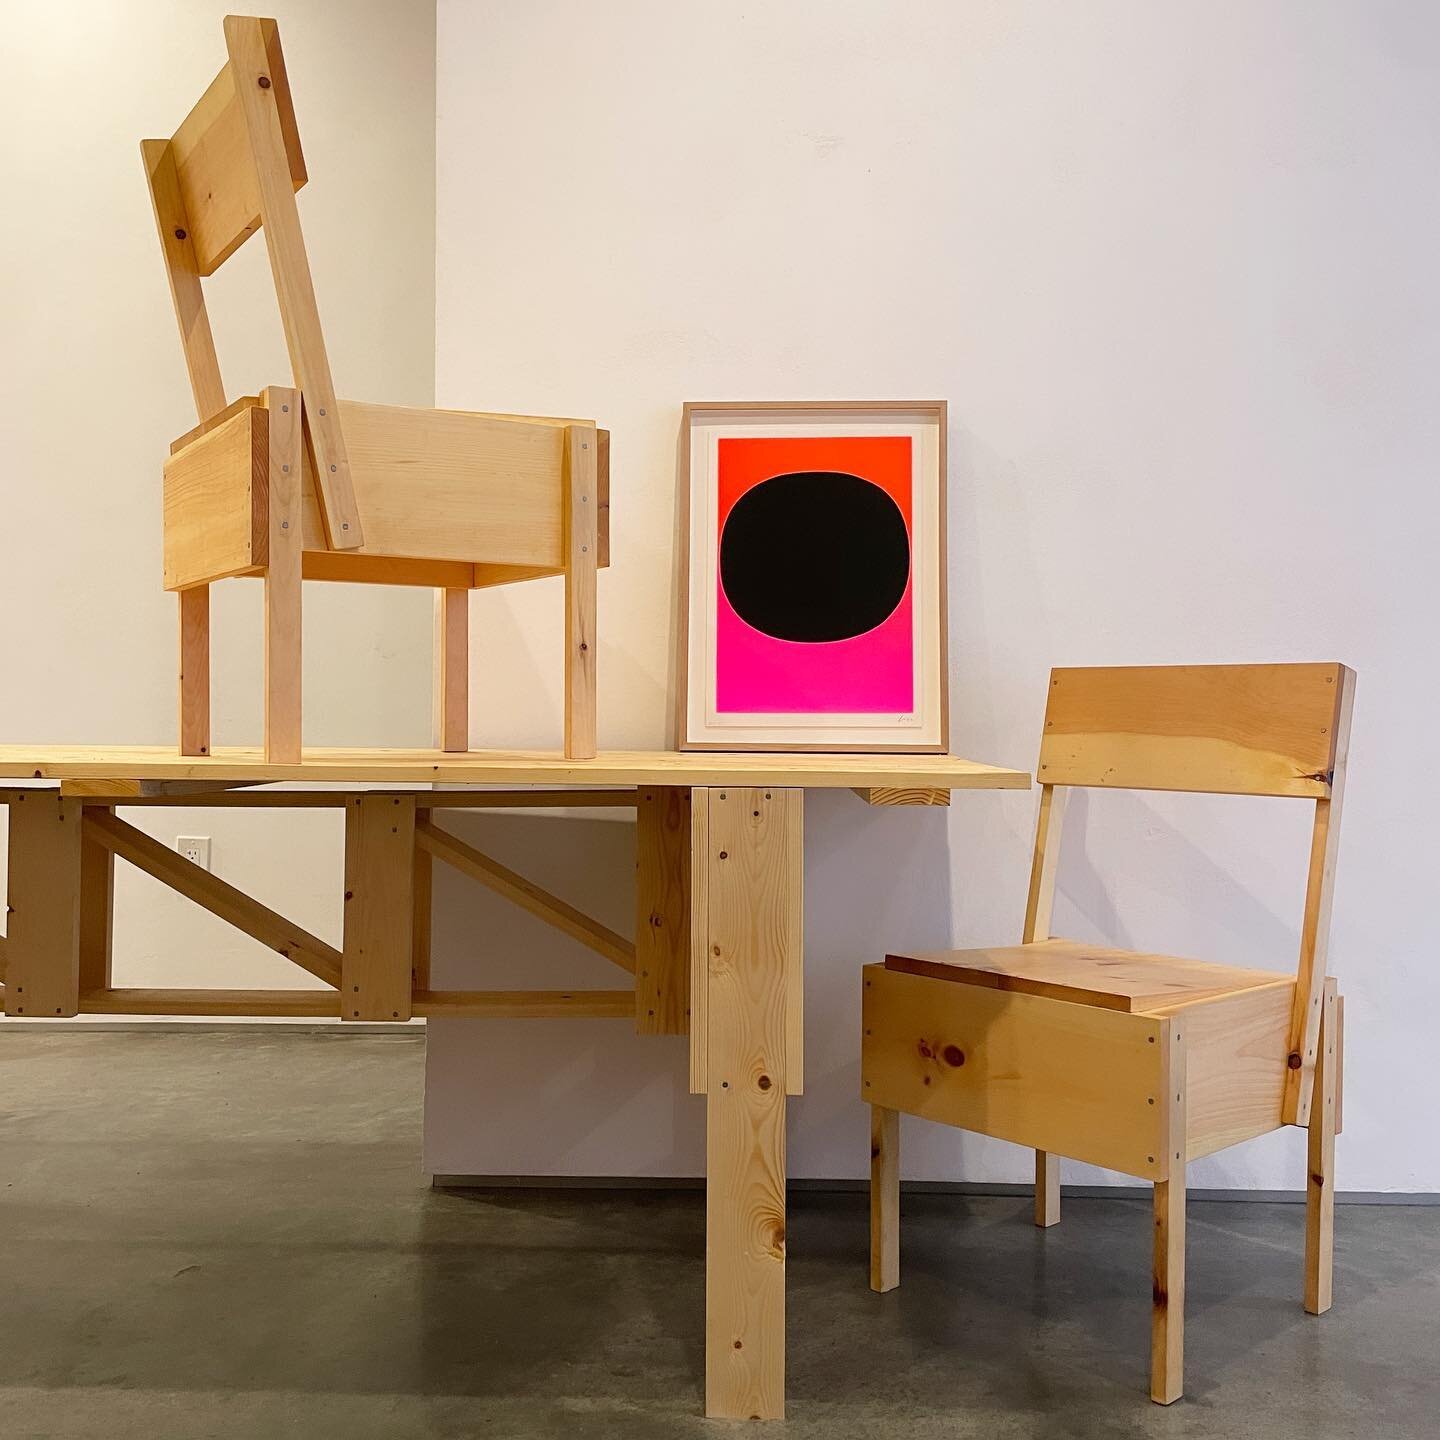 Pittsburgh PSA: Hi you, lovers of the modern form. Come build yourself a Sedia 1 (Chair) from common board pine &amp; nails, per the 1974 design of the extraordinary Enzo Mari (1932-2020). 🟧Workshop hosted by new studio @hongkongtrees on March 9 aft